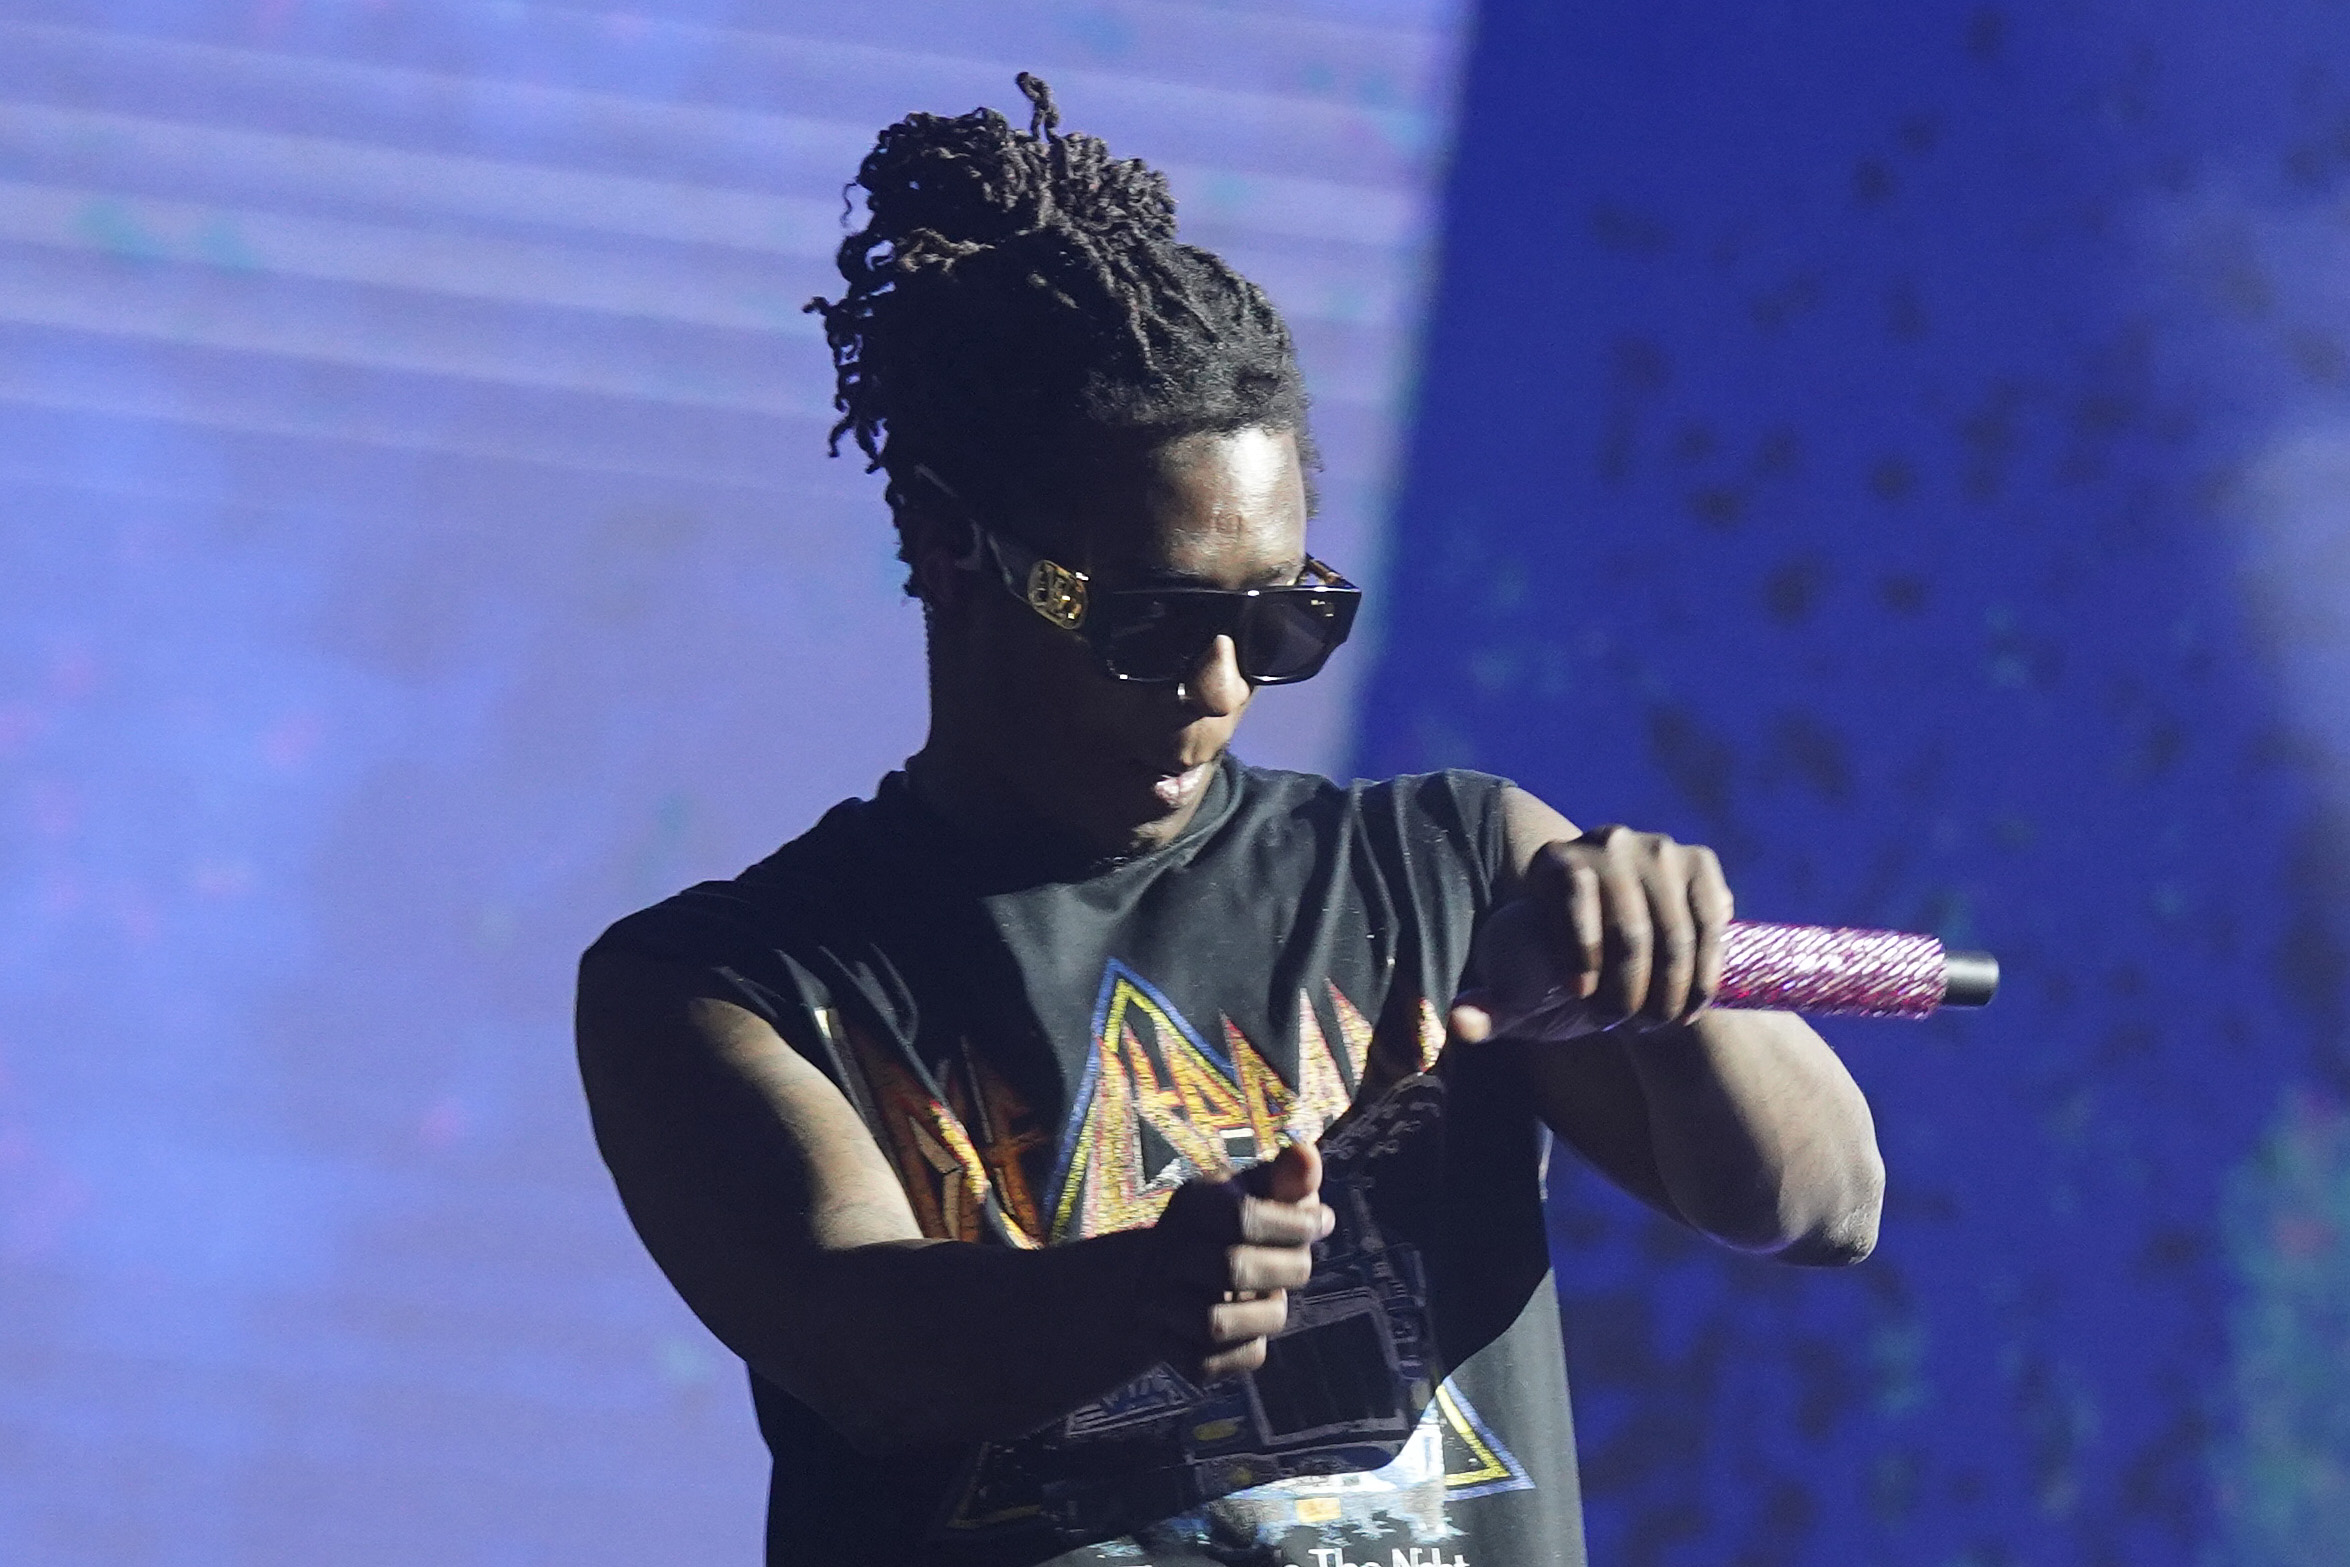 Young Thug performs onstage during the 2022 SXSW Conference and Festivals on March 17, 2022 in Austin, Texas.